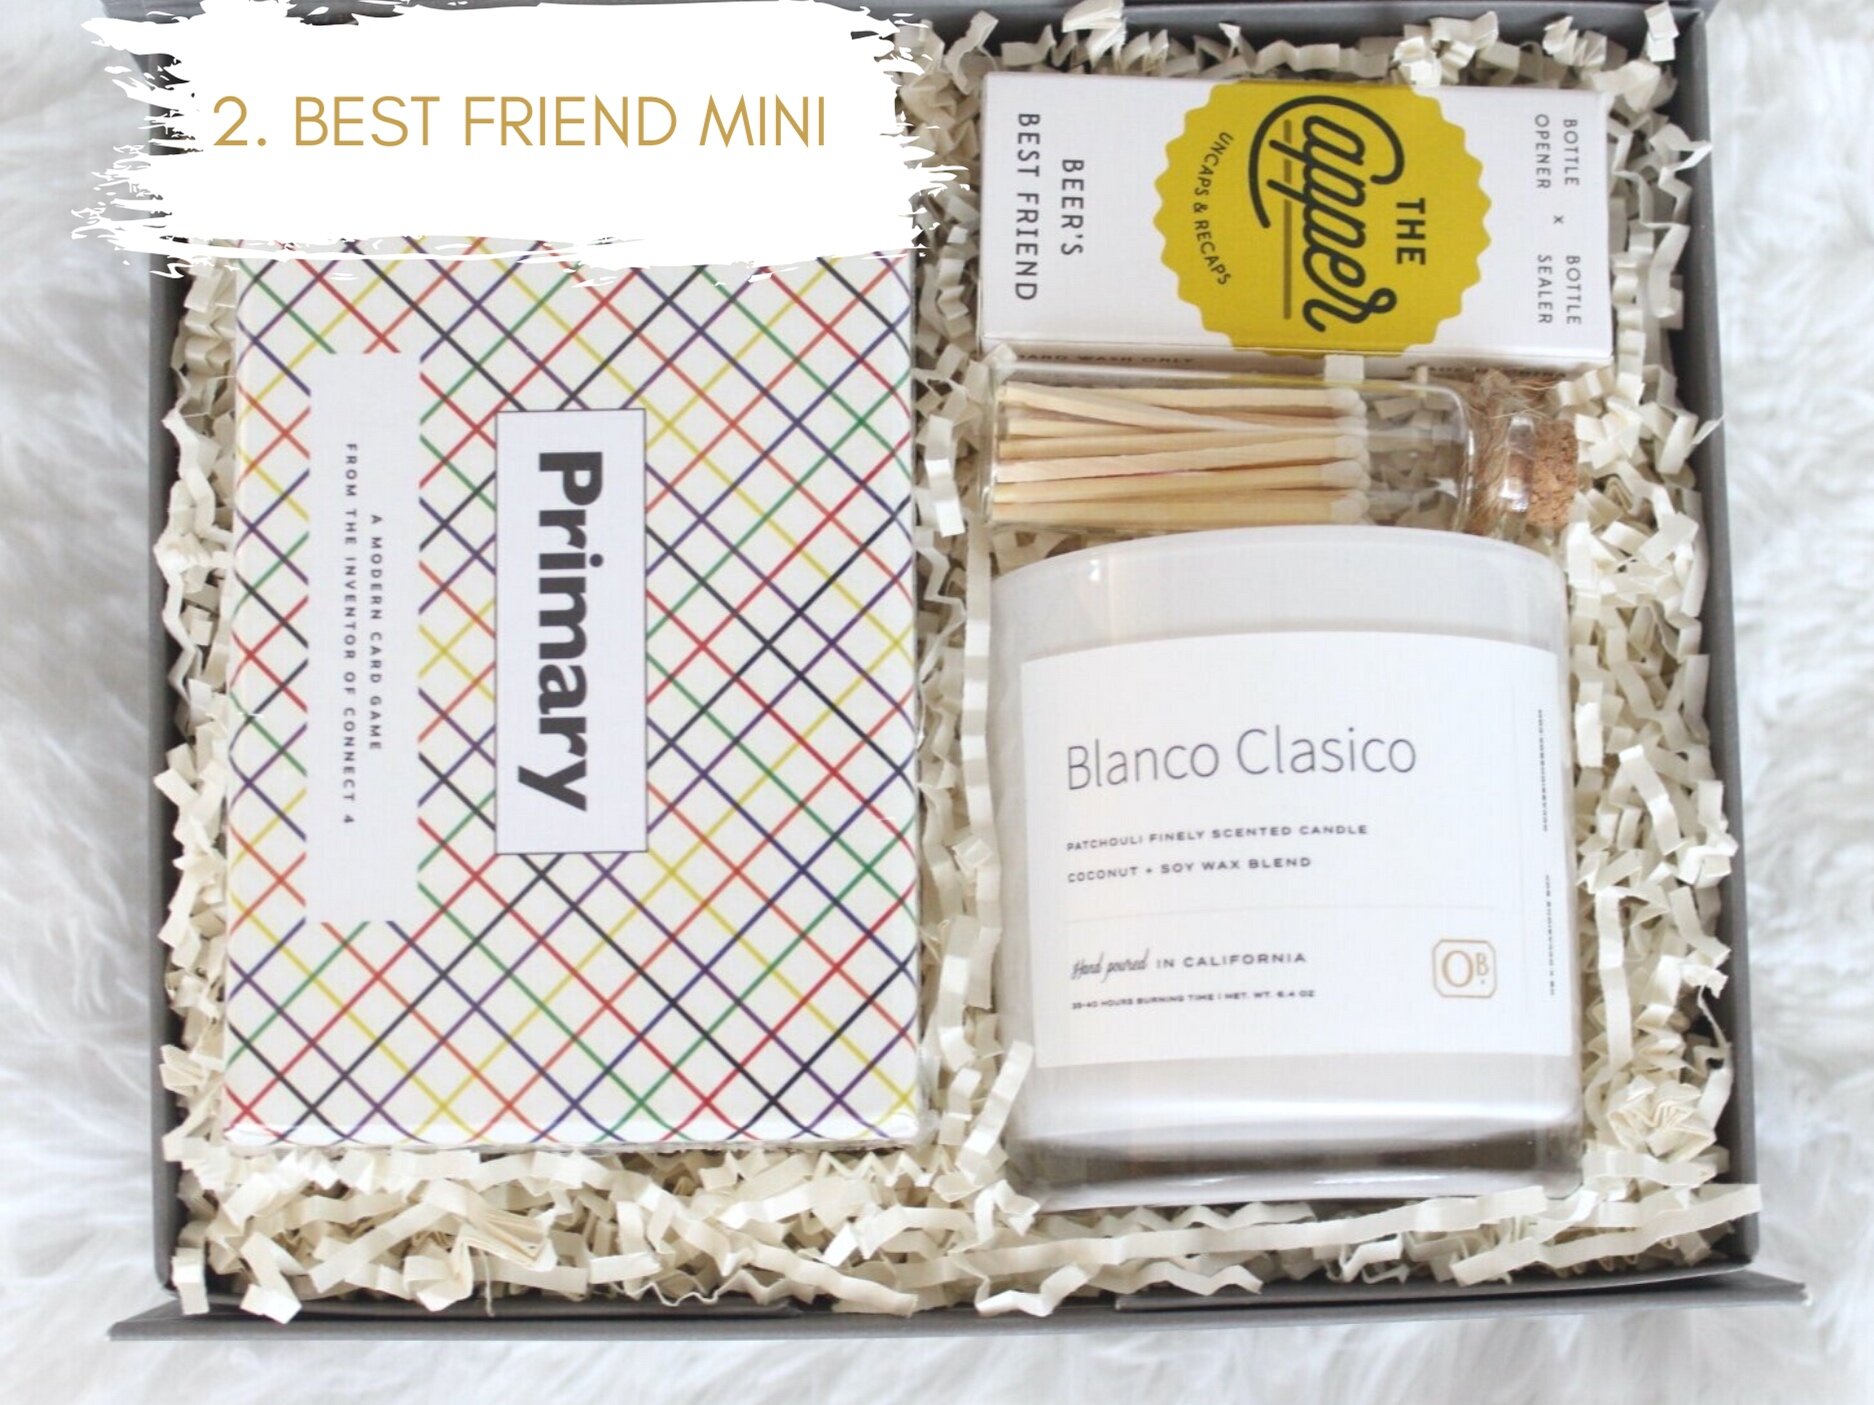  “This box is a mini version of Stay Home which is also playful but with a more mature feel since it consists of OB’s finely scented candle and a beer bottle opener which are items that can be enjoyed alone and also when we are ready to resume to tim